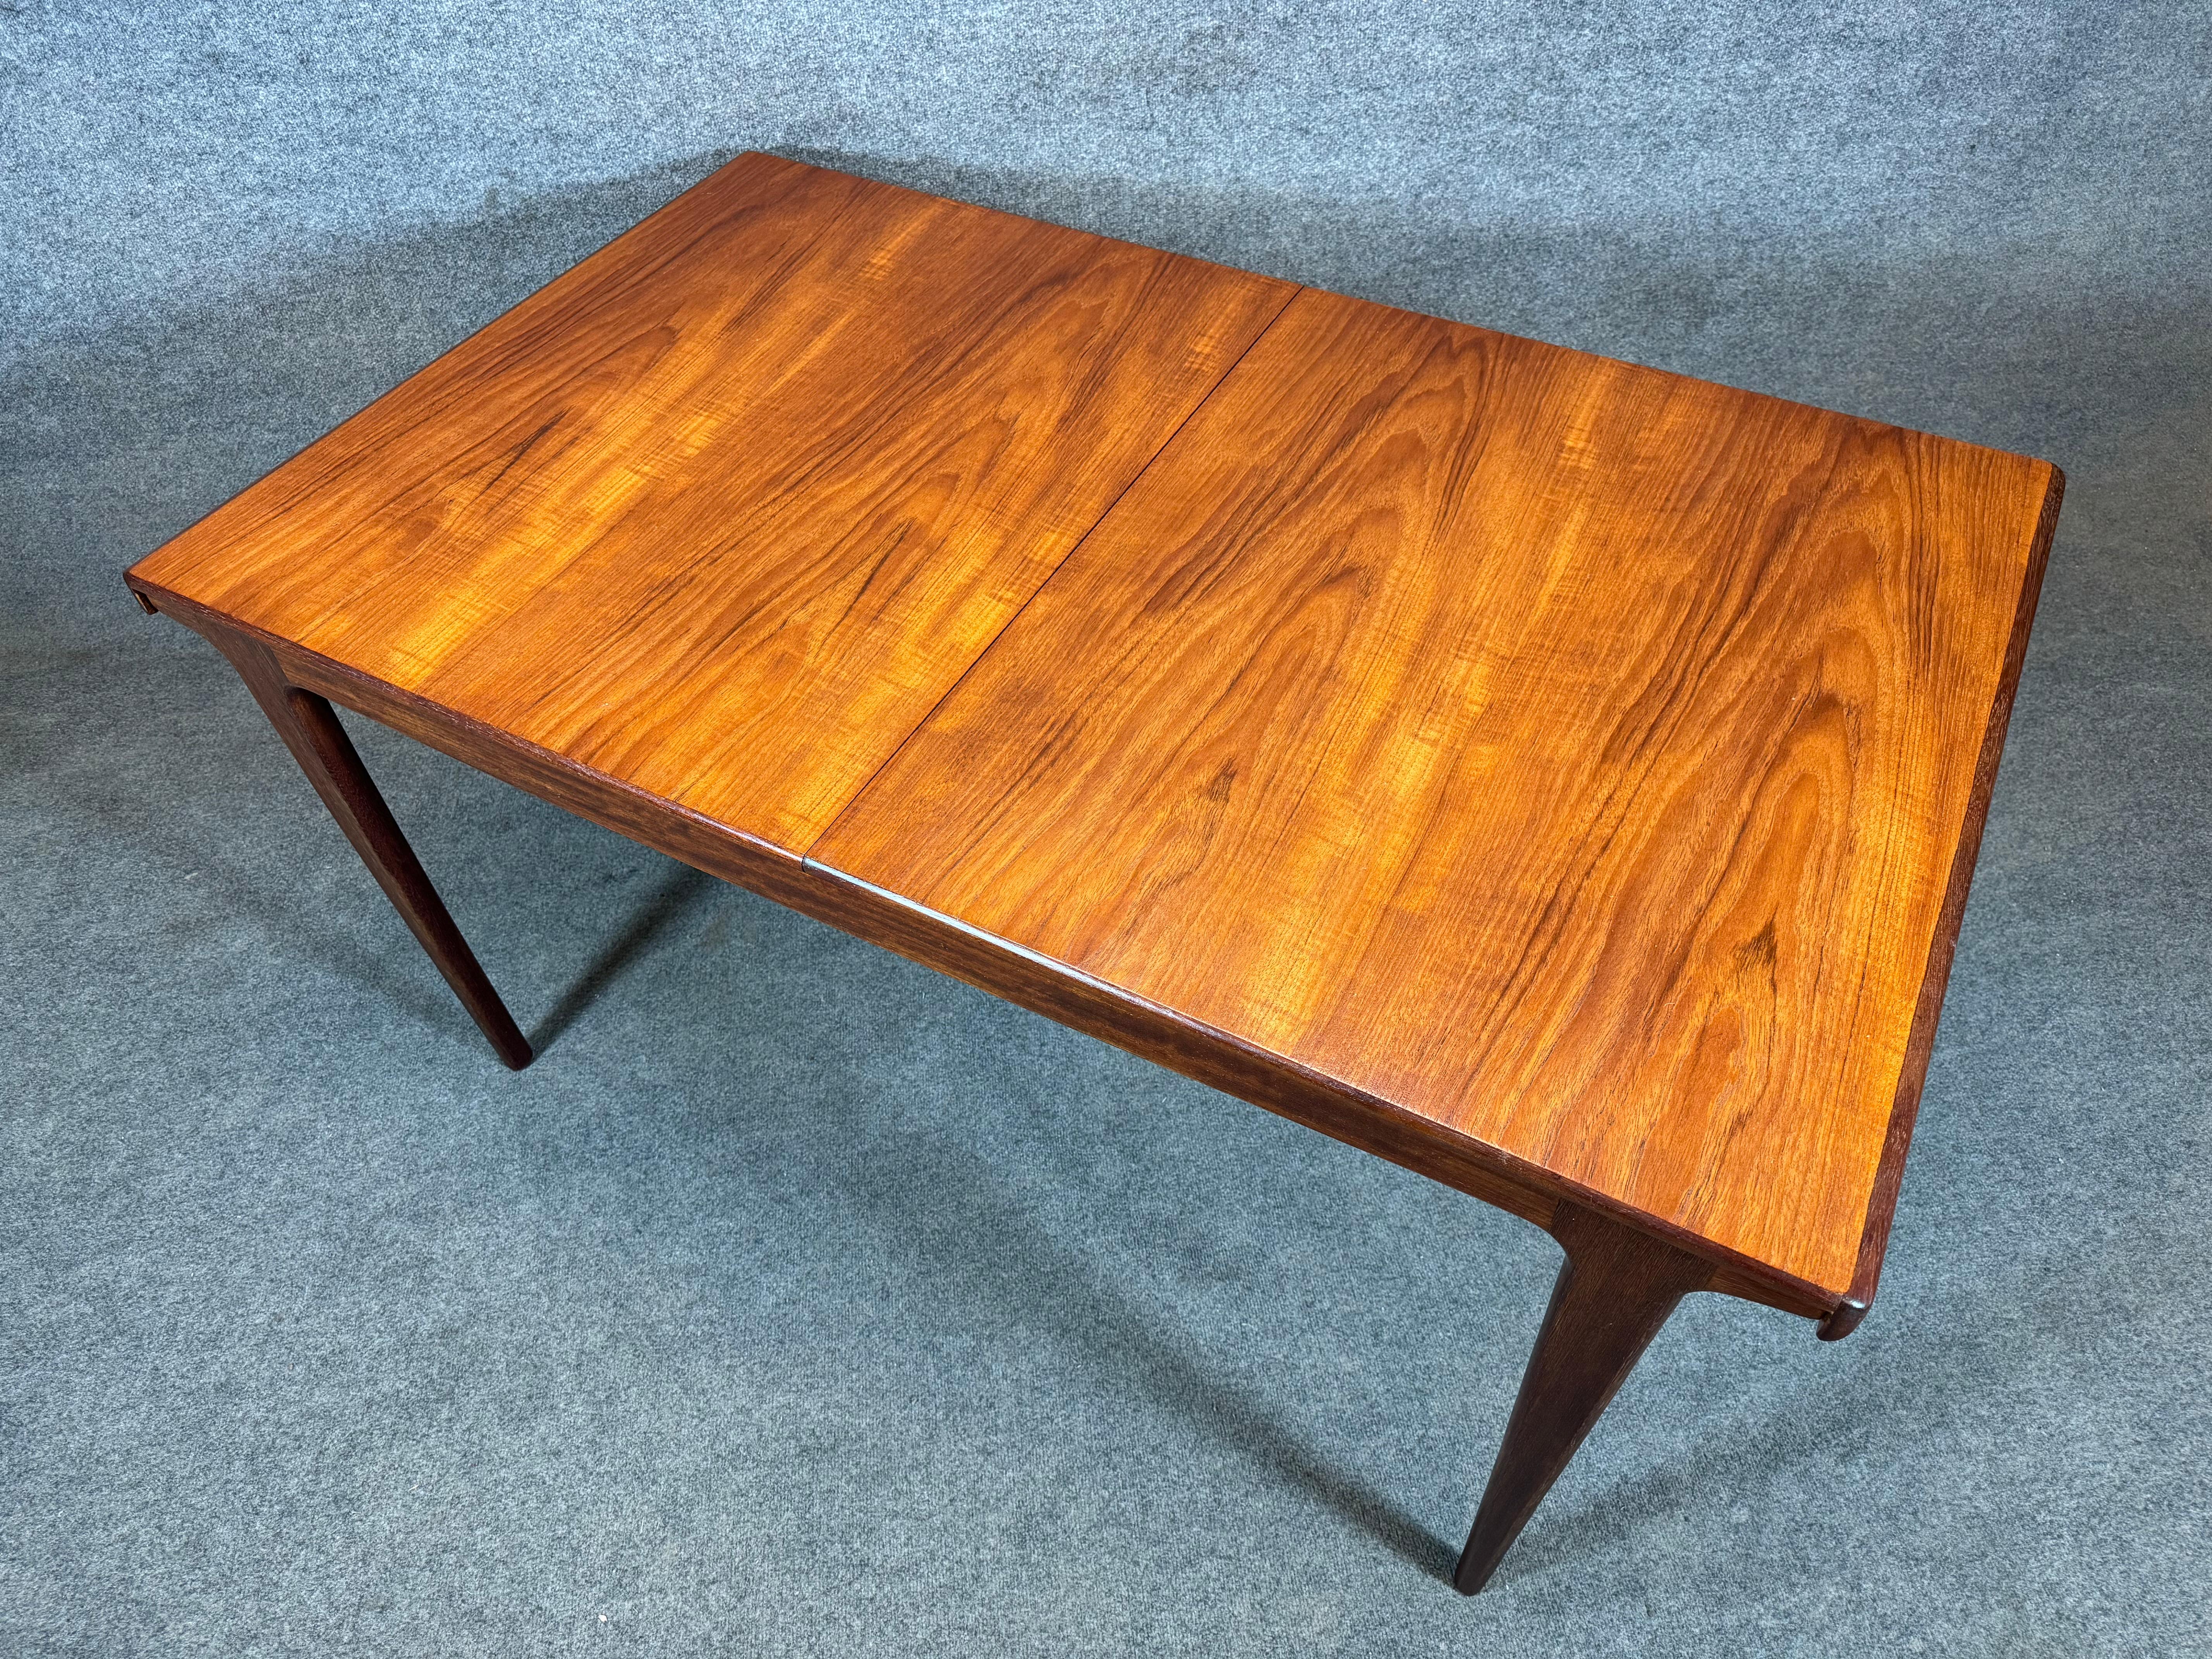 Vintage Mid Century Modern Teak Dining Table by John Herbert for A. Younger Ltd. In Good Condition For Sale In San Marcos, CA